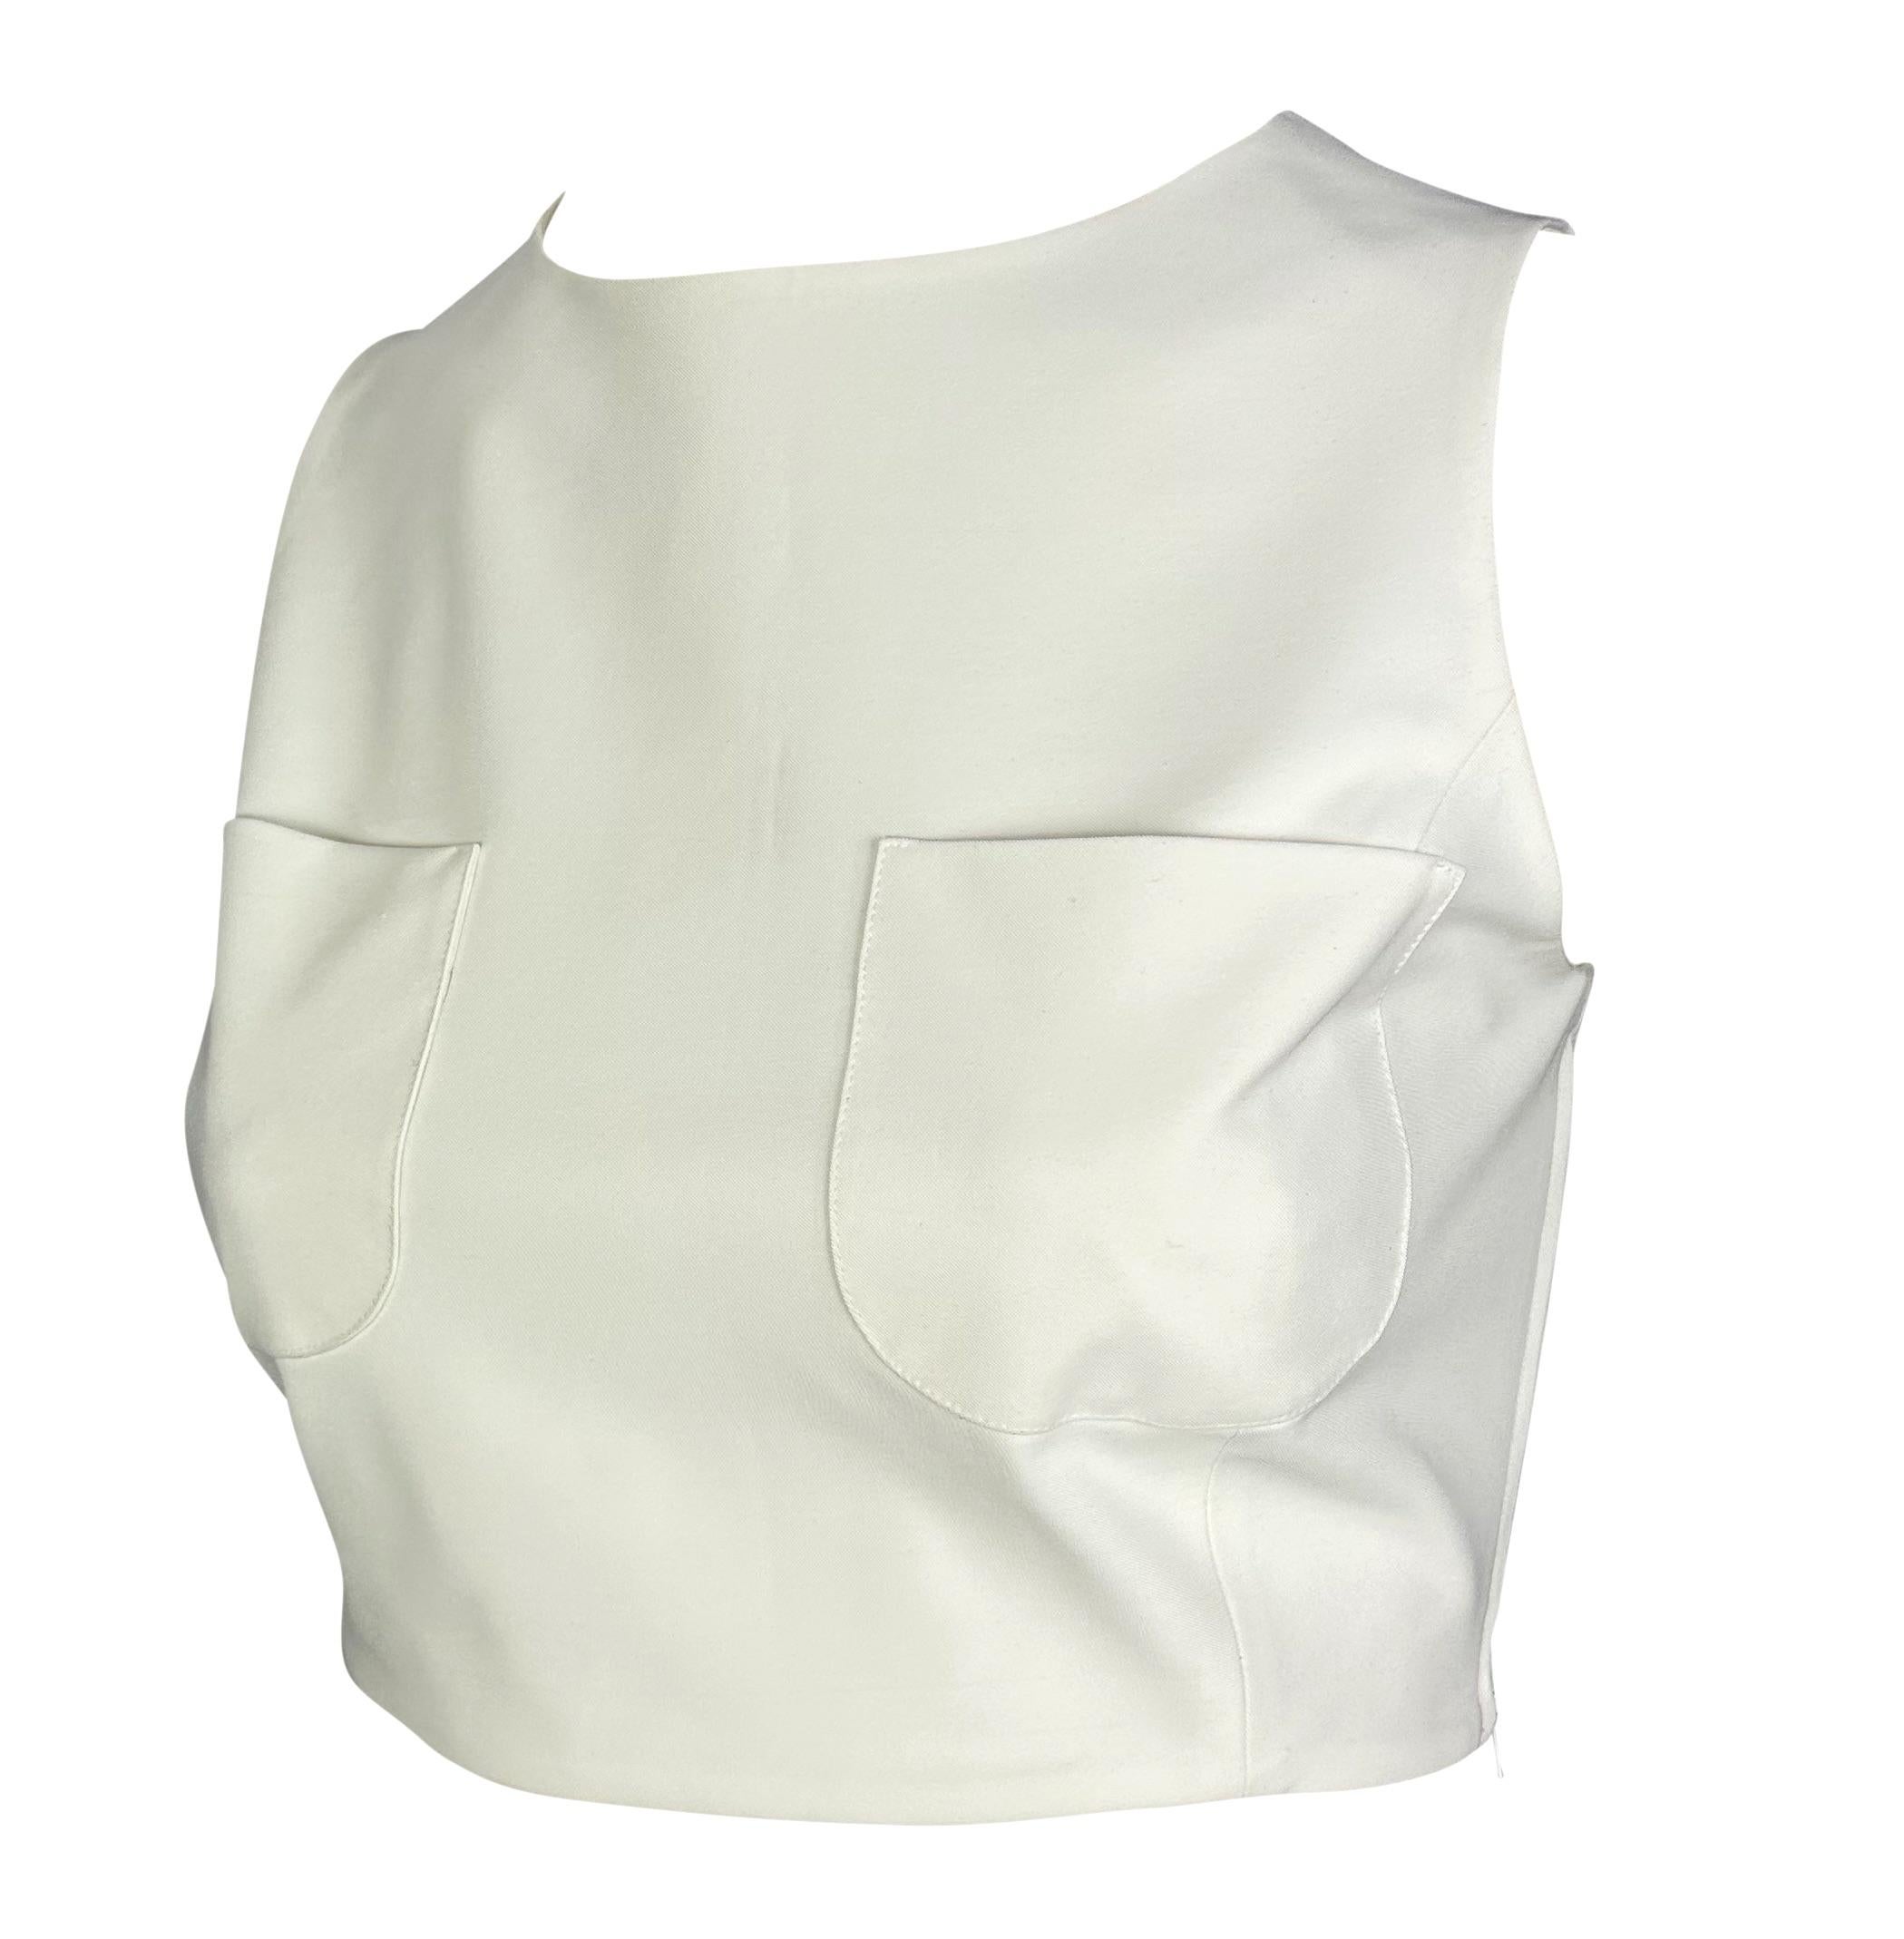 Presenting a fabulous white Gucci crop top, designed by Tom Ford. From the Spring/Summer 1996 collection, this chic sleeveless crop top features a crew neckline and two pockets at the bust. Add this hot Gucci by Tom Ford crop top to your wardrobe!